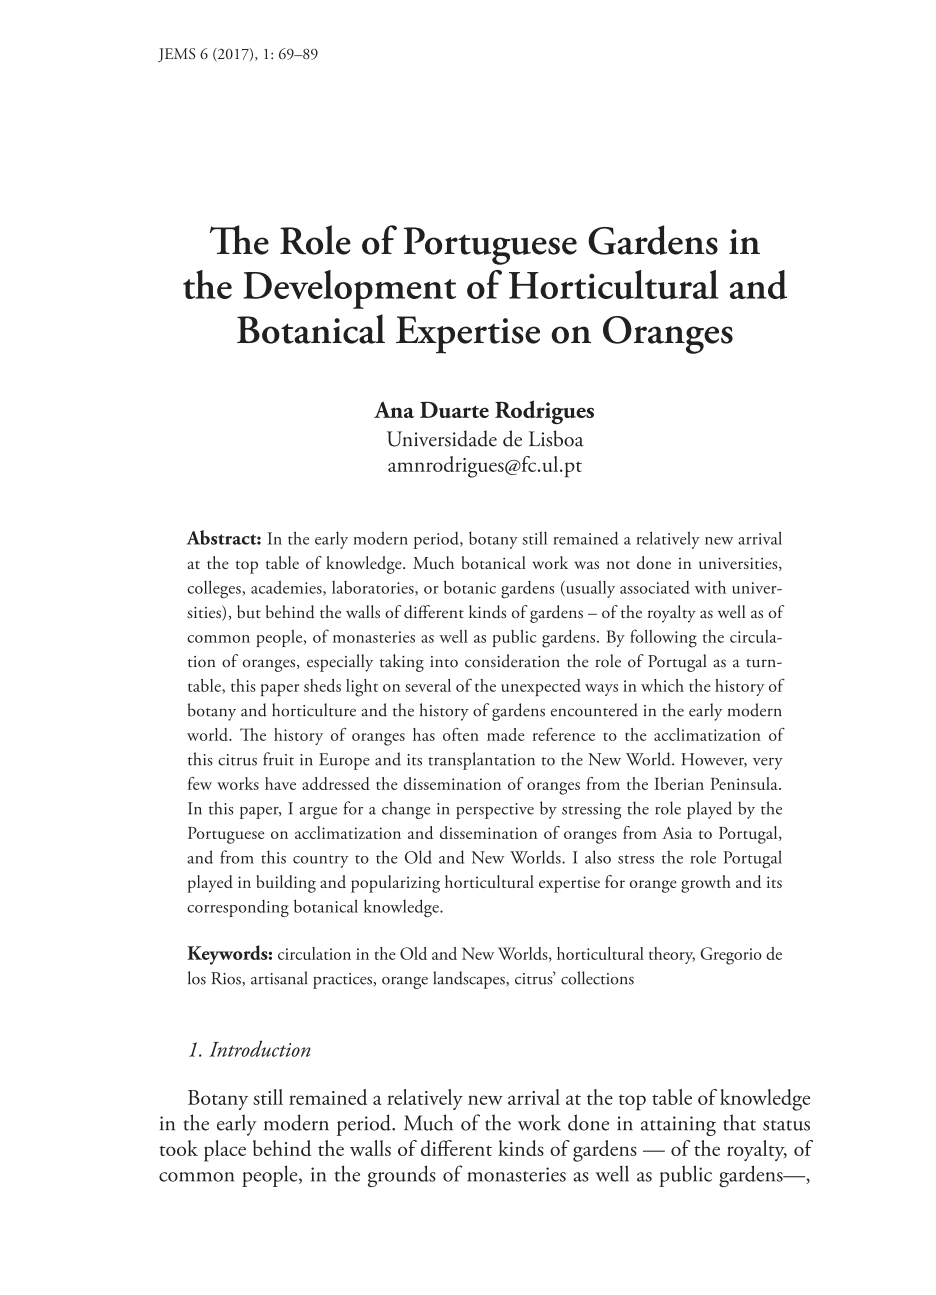 The role of Portuguese Gardens in the development of Botanical and Horticultural Expertise, Capa